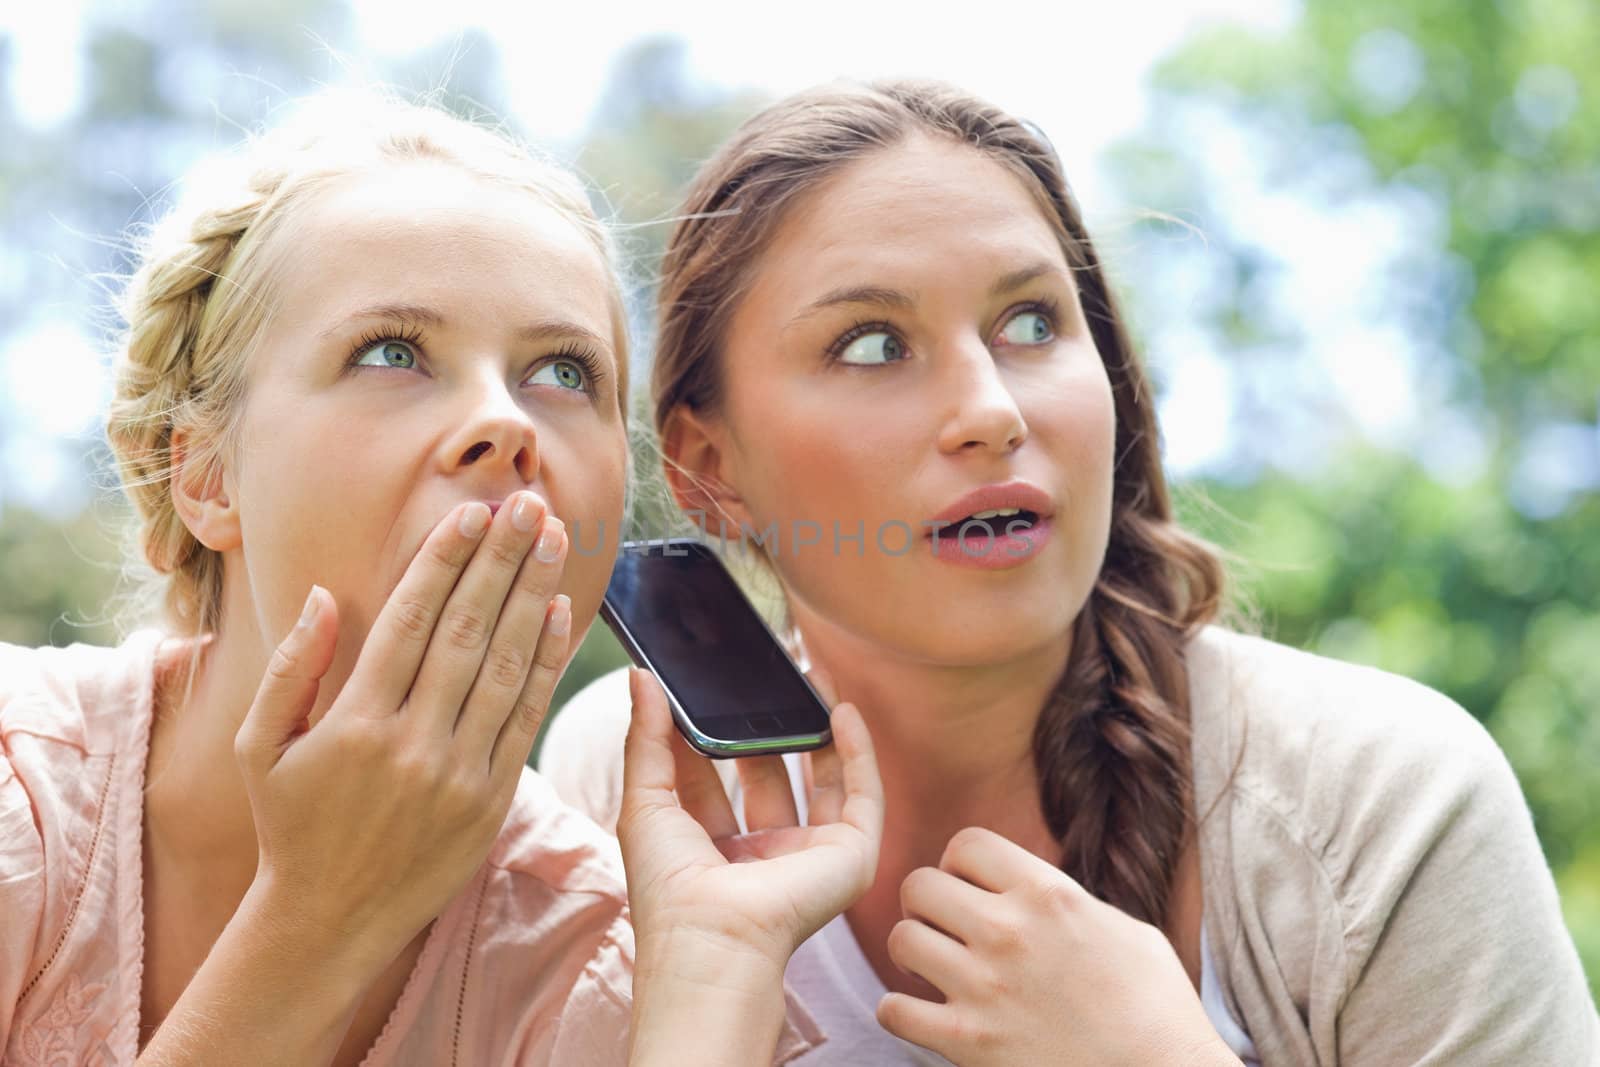 Friends listening to a phone call in the park by Wavebreakmedia